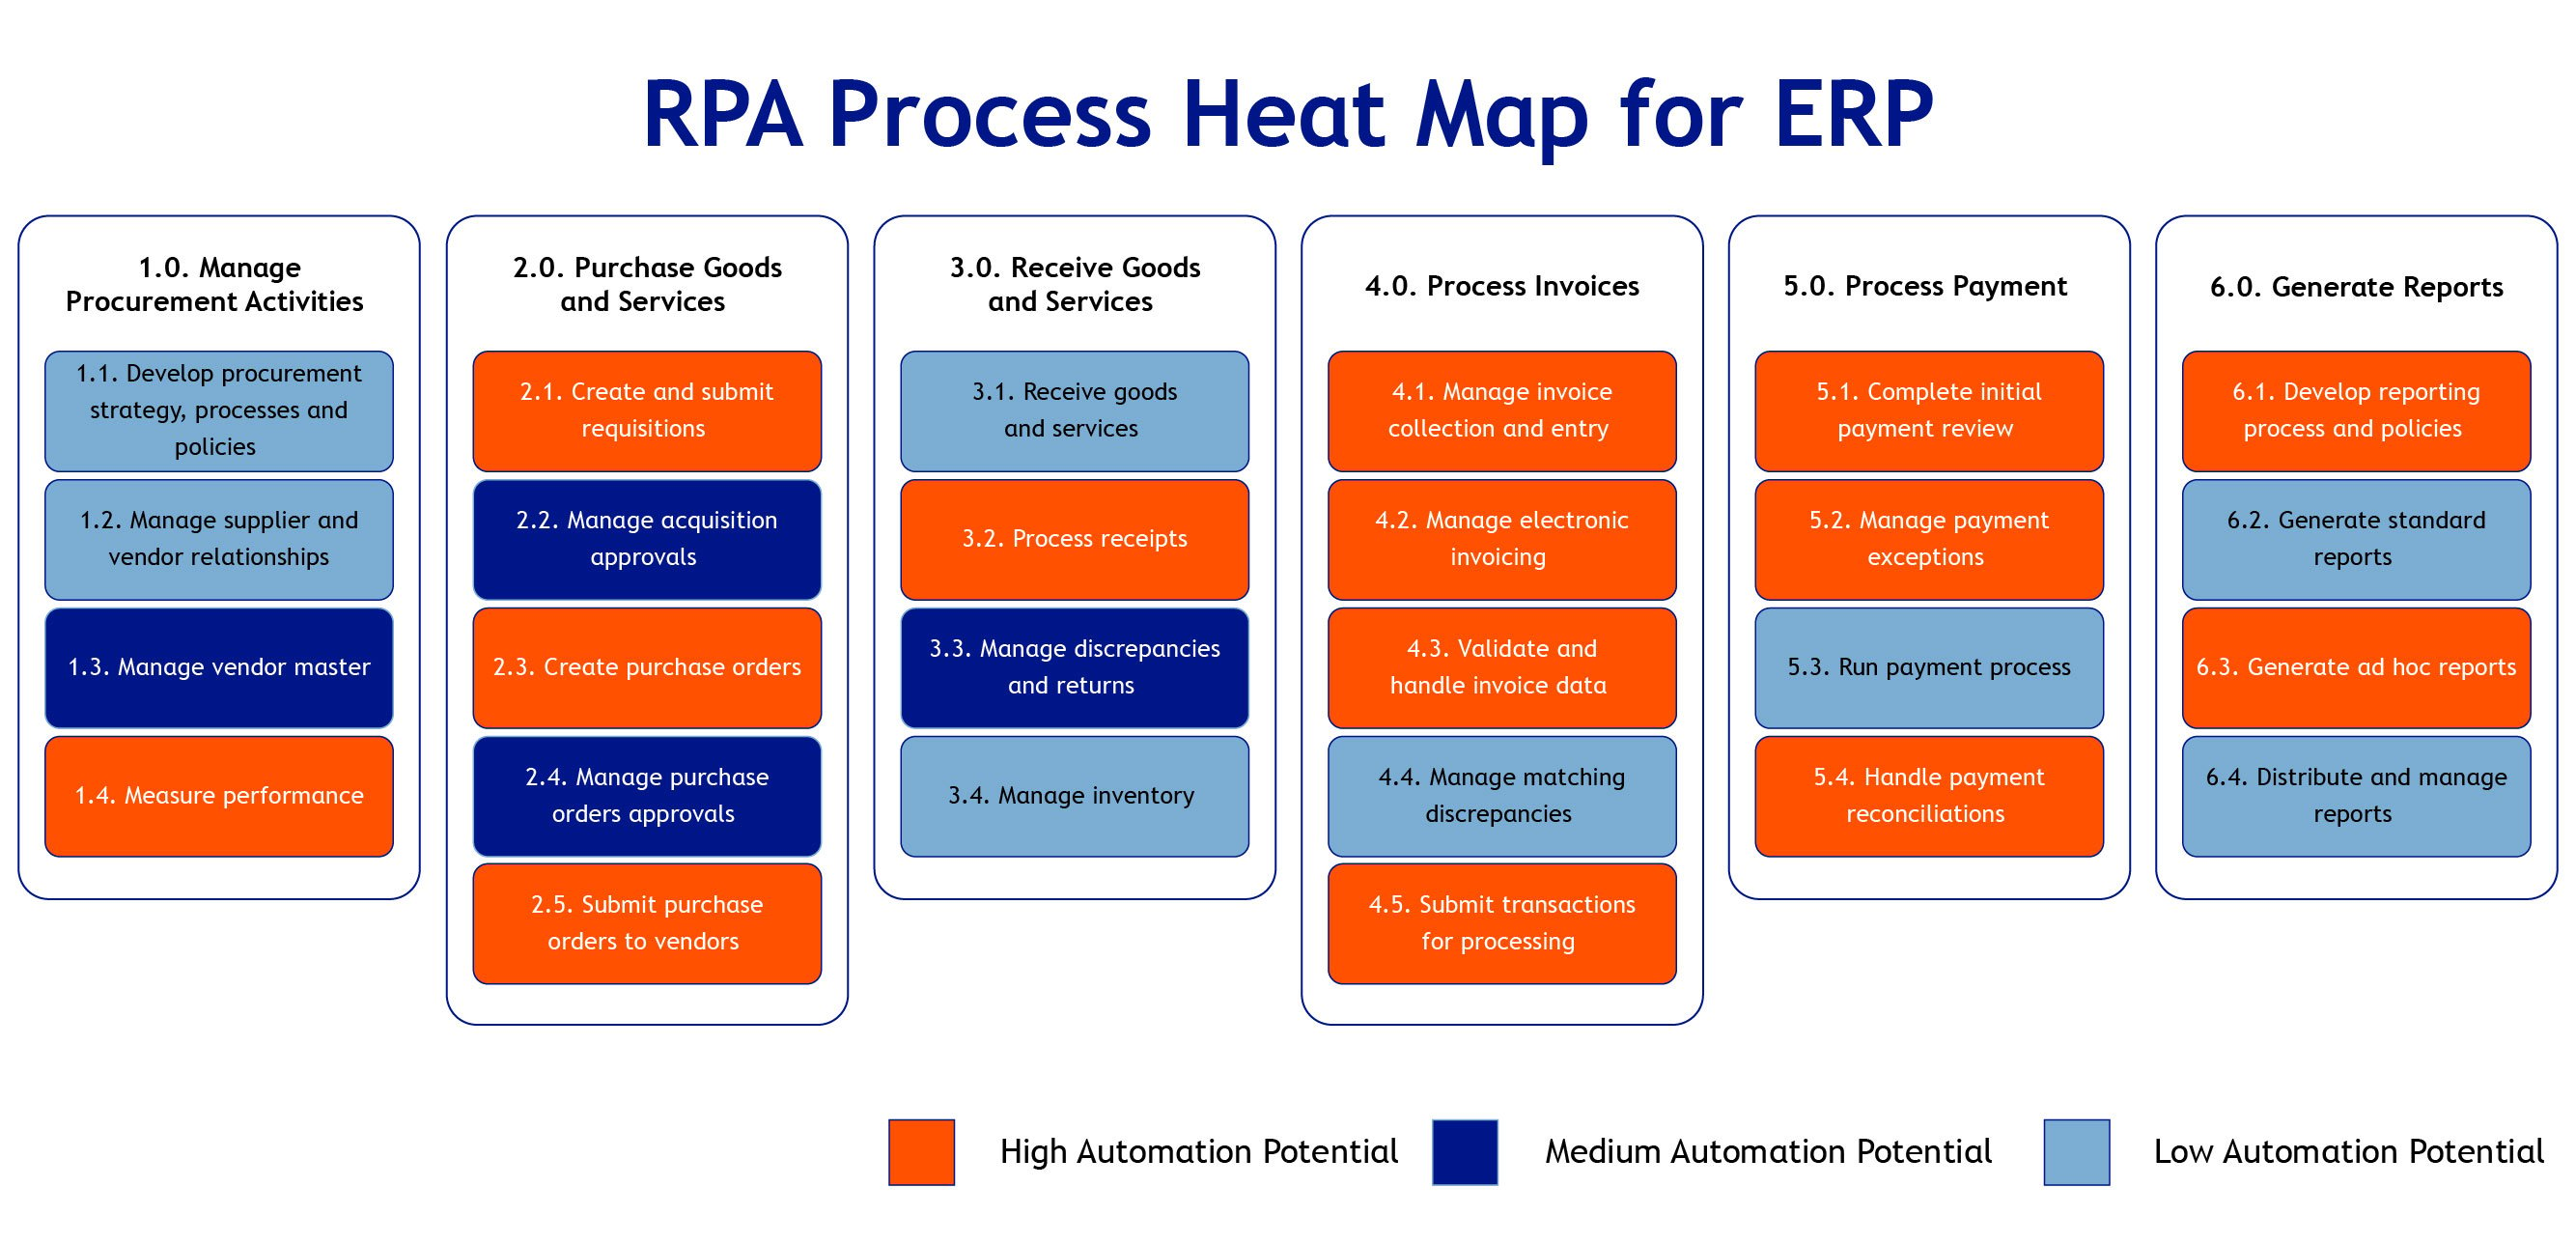 RPA Process Heat Map for ERP